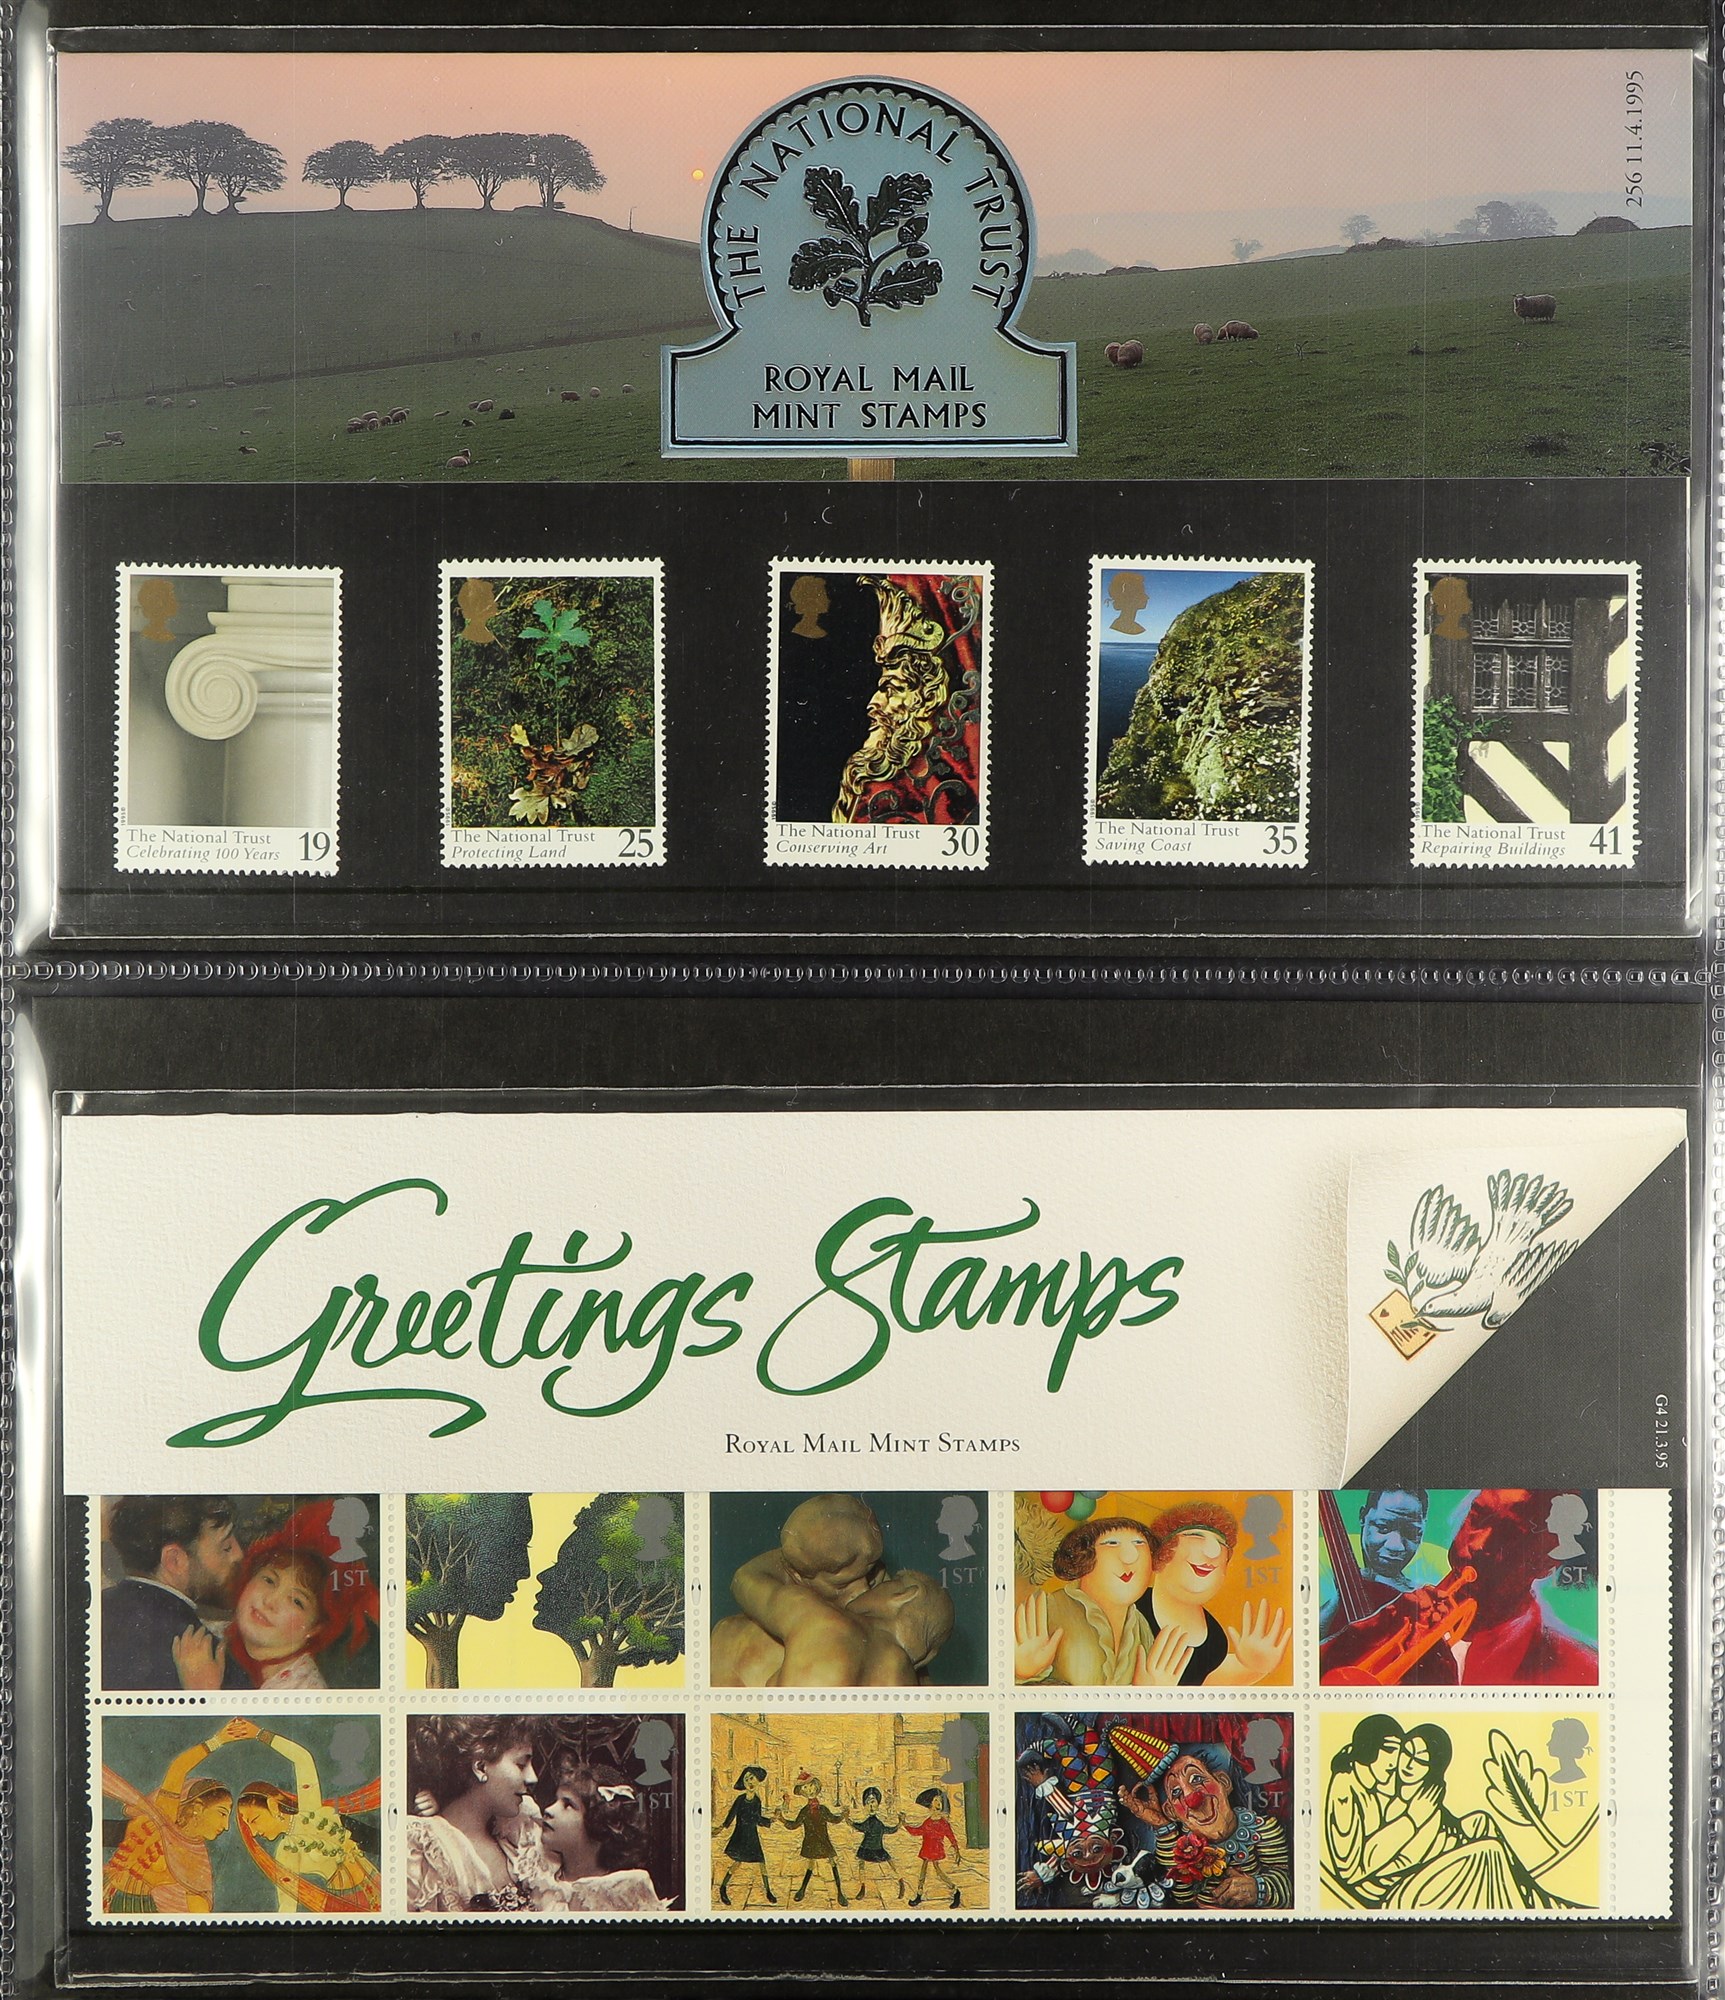 GREAT BRITAIN MOSTLY GREAT BRITAIN including 1970's-2000 presentation packs in albums, large blocks, - Image 4 of 25